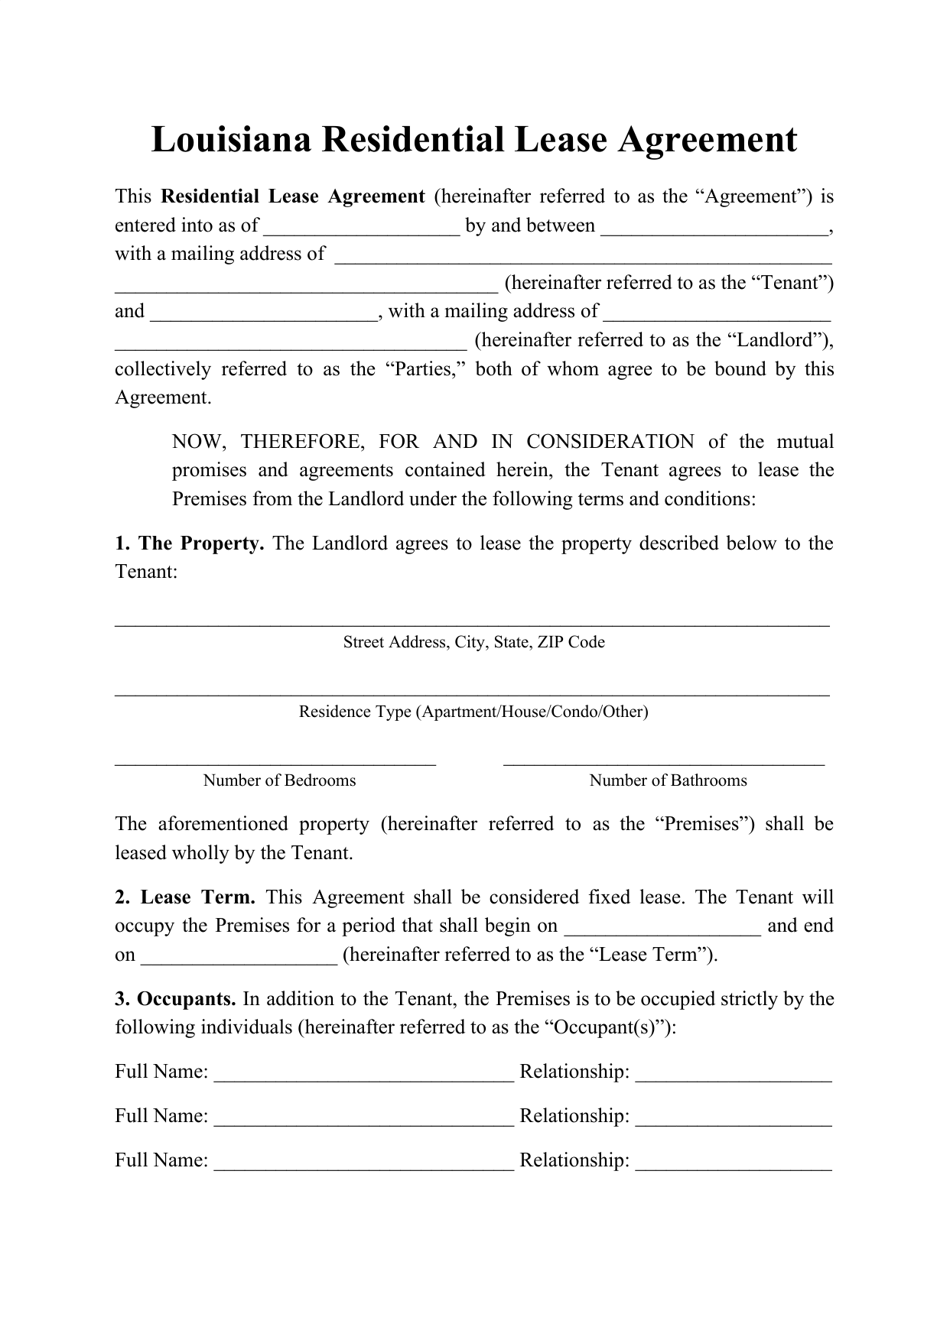 louisiana residential lease agreement template download printable pdf templateroller